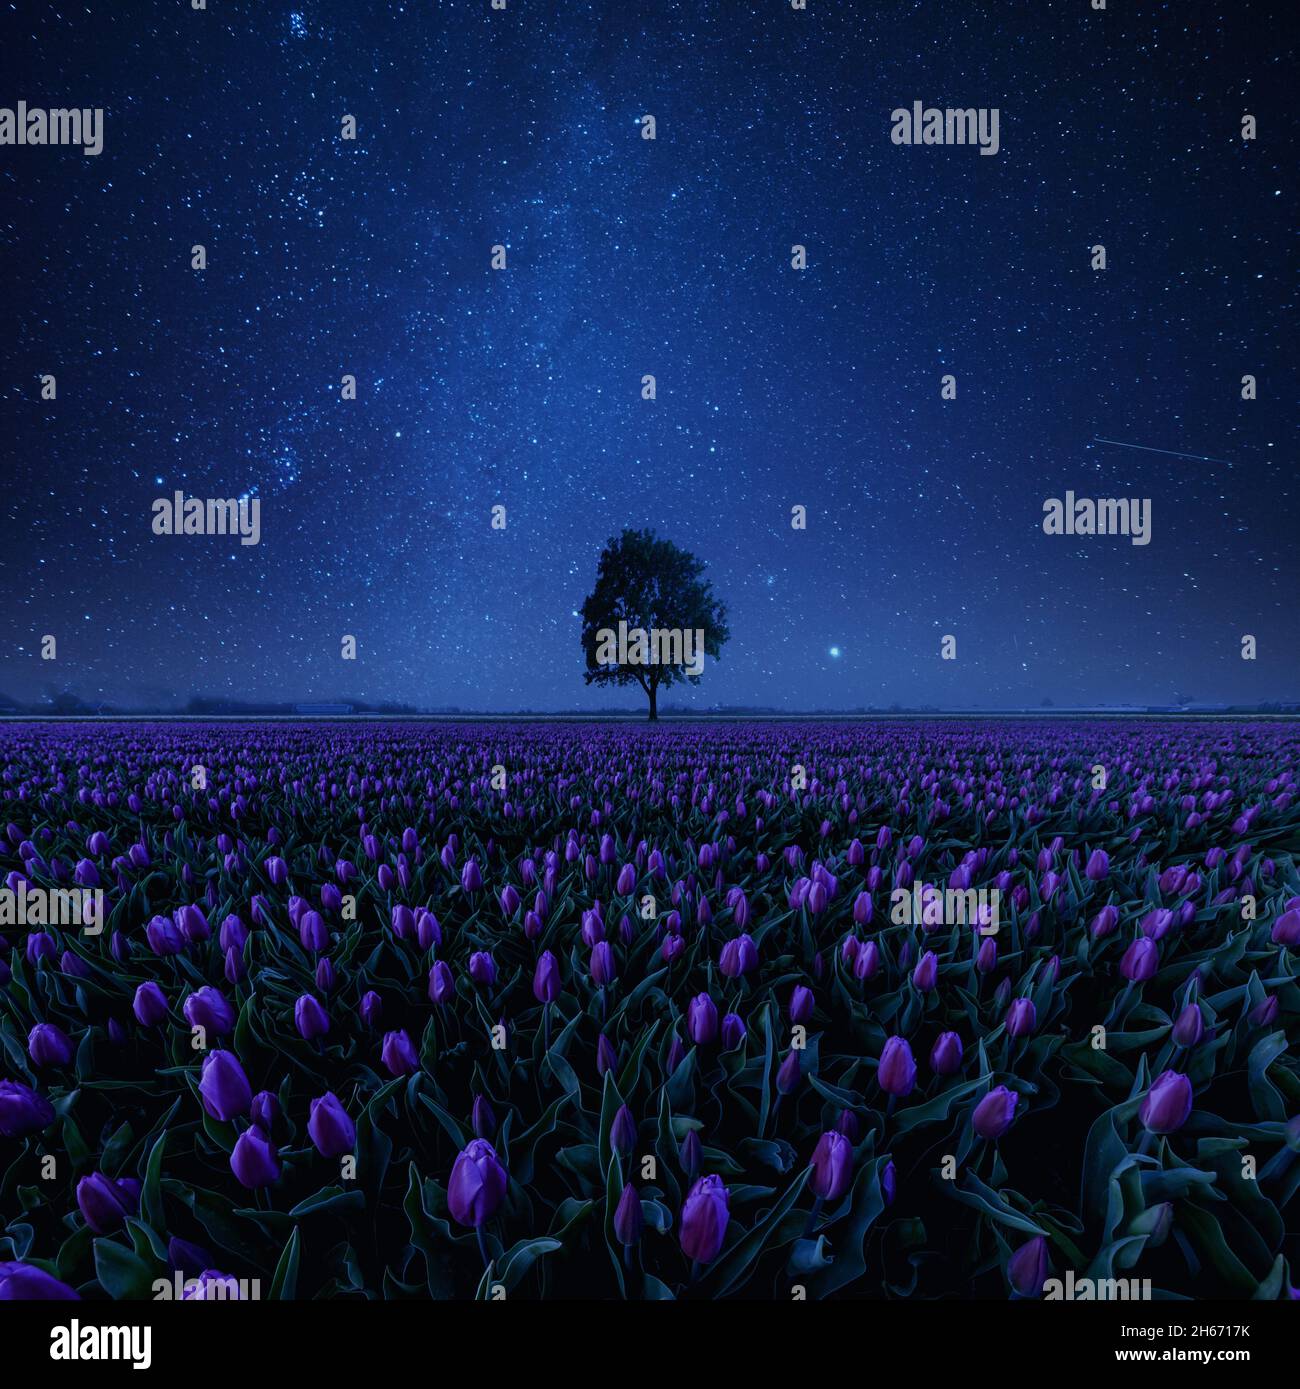 Night field of tulips and lonely tree. Landscape with stars, moon and flowers Stock Photo